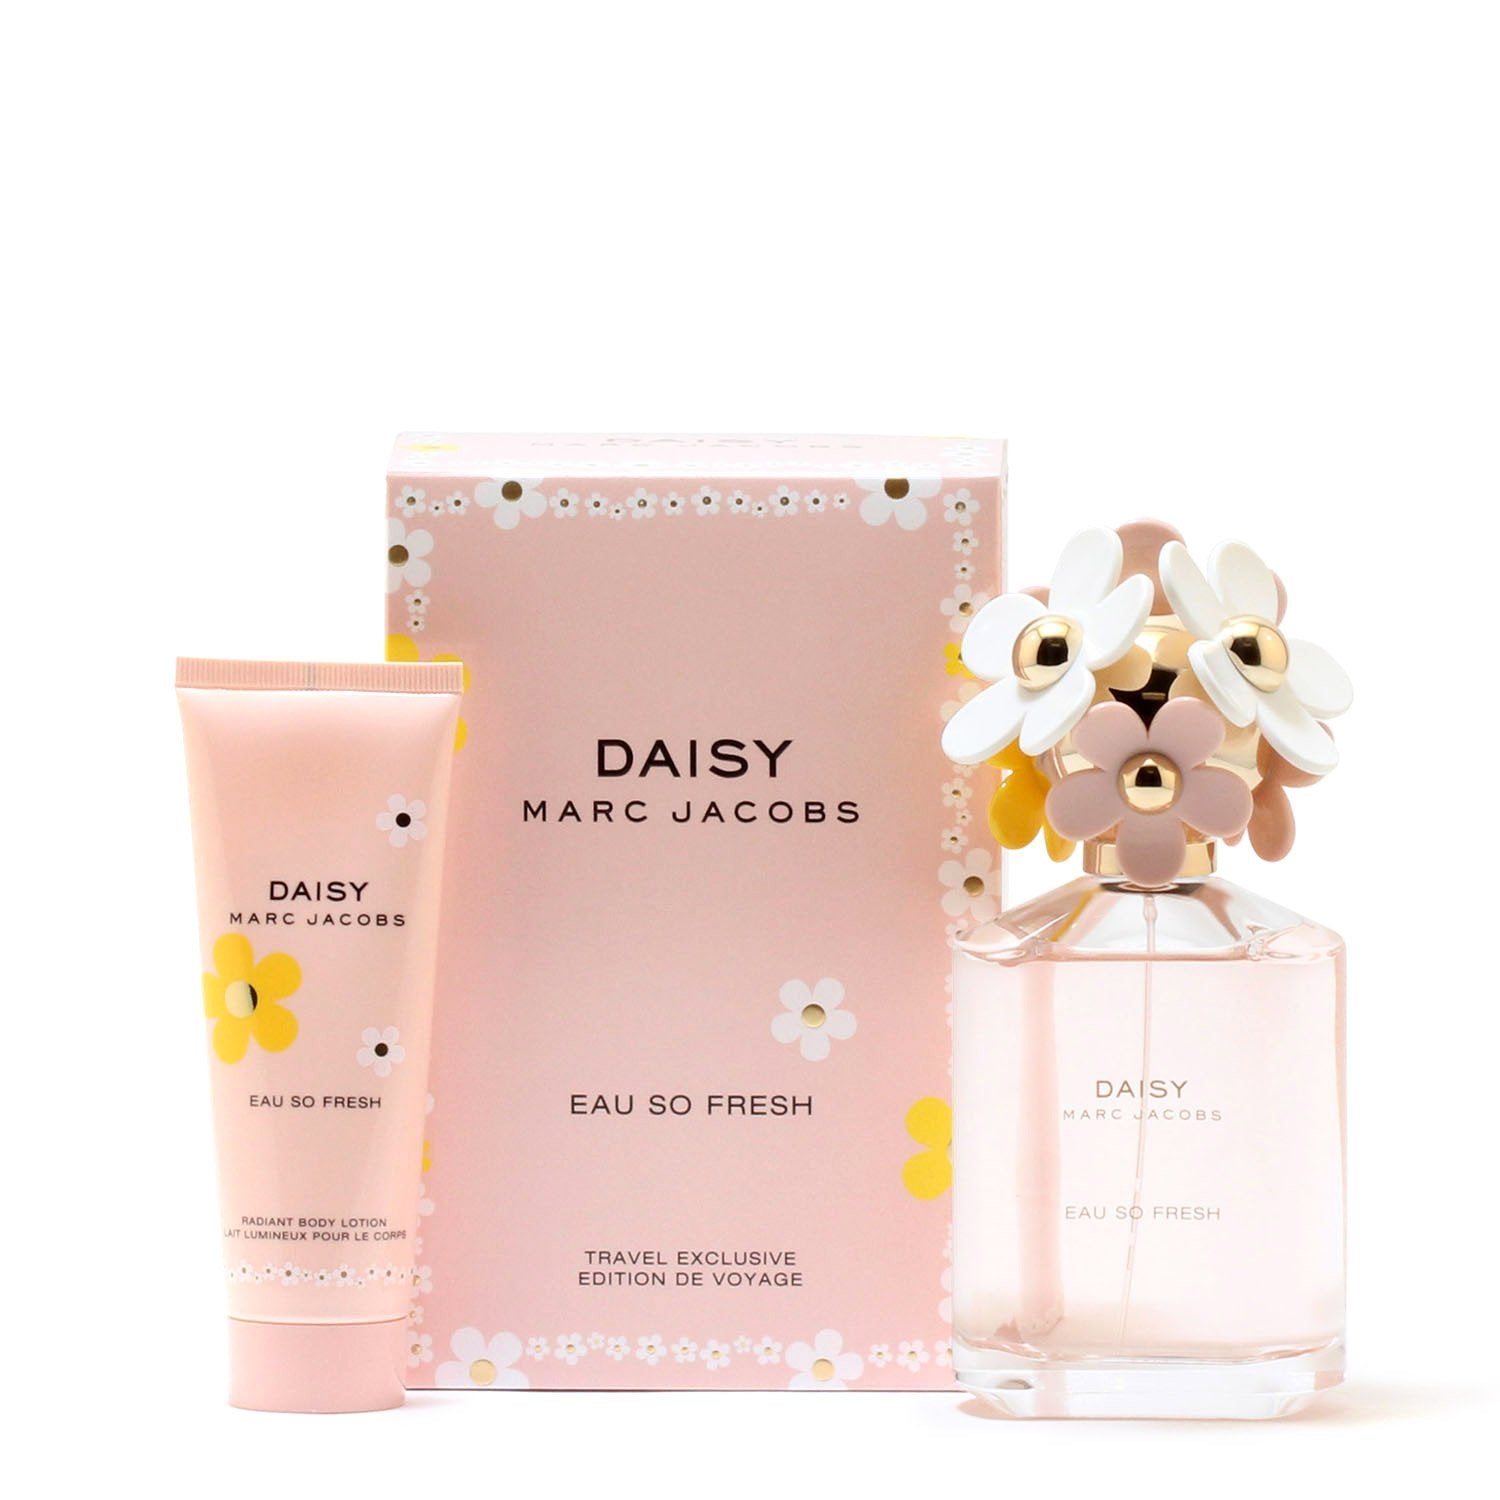 Perfume Sets - DAISY EAU SO FRESH FOR WOMEN BY MARC JACOBS - TRAVEL EDITION GIFT SET